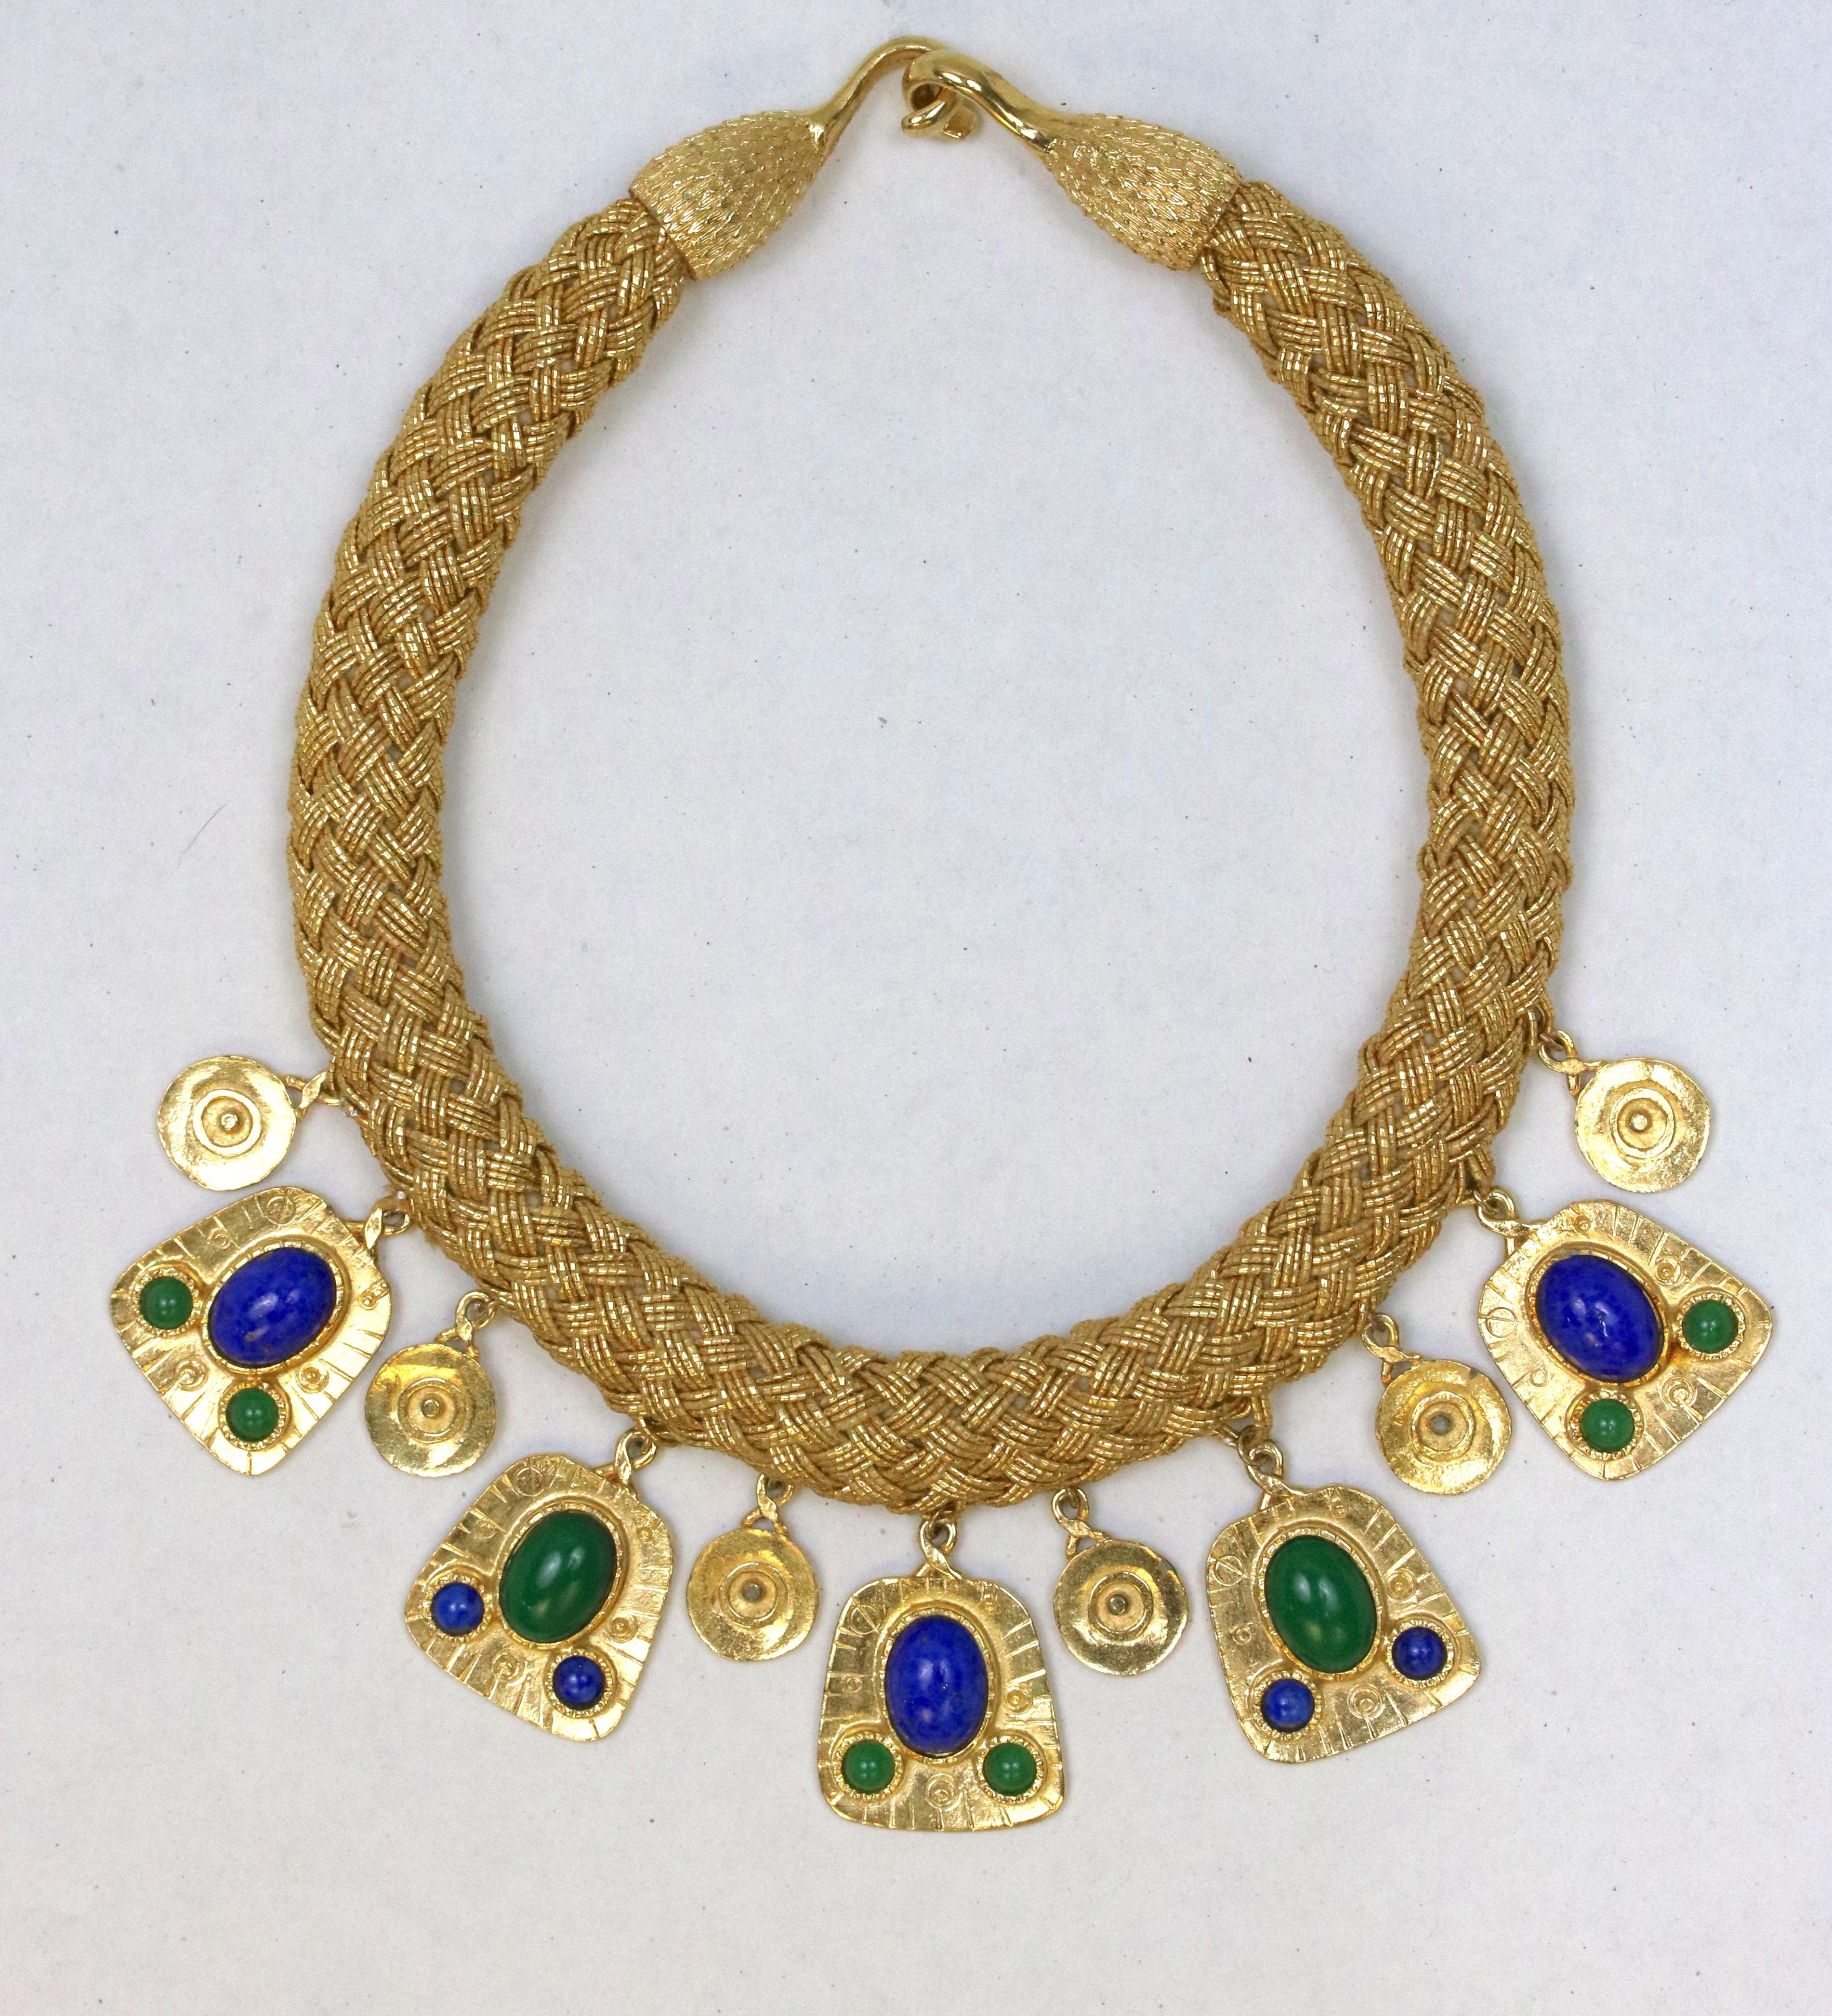 Women's Gold Woven 'Cleopatra' Collar Necklace-Malachite and Lapis Drops For Sale